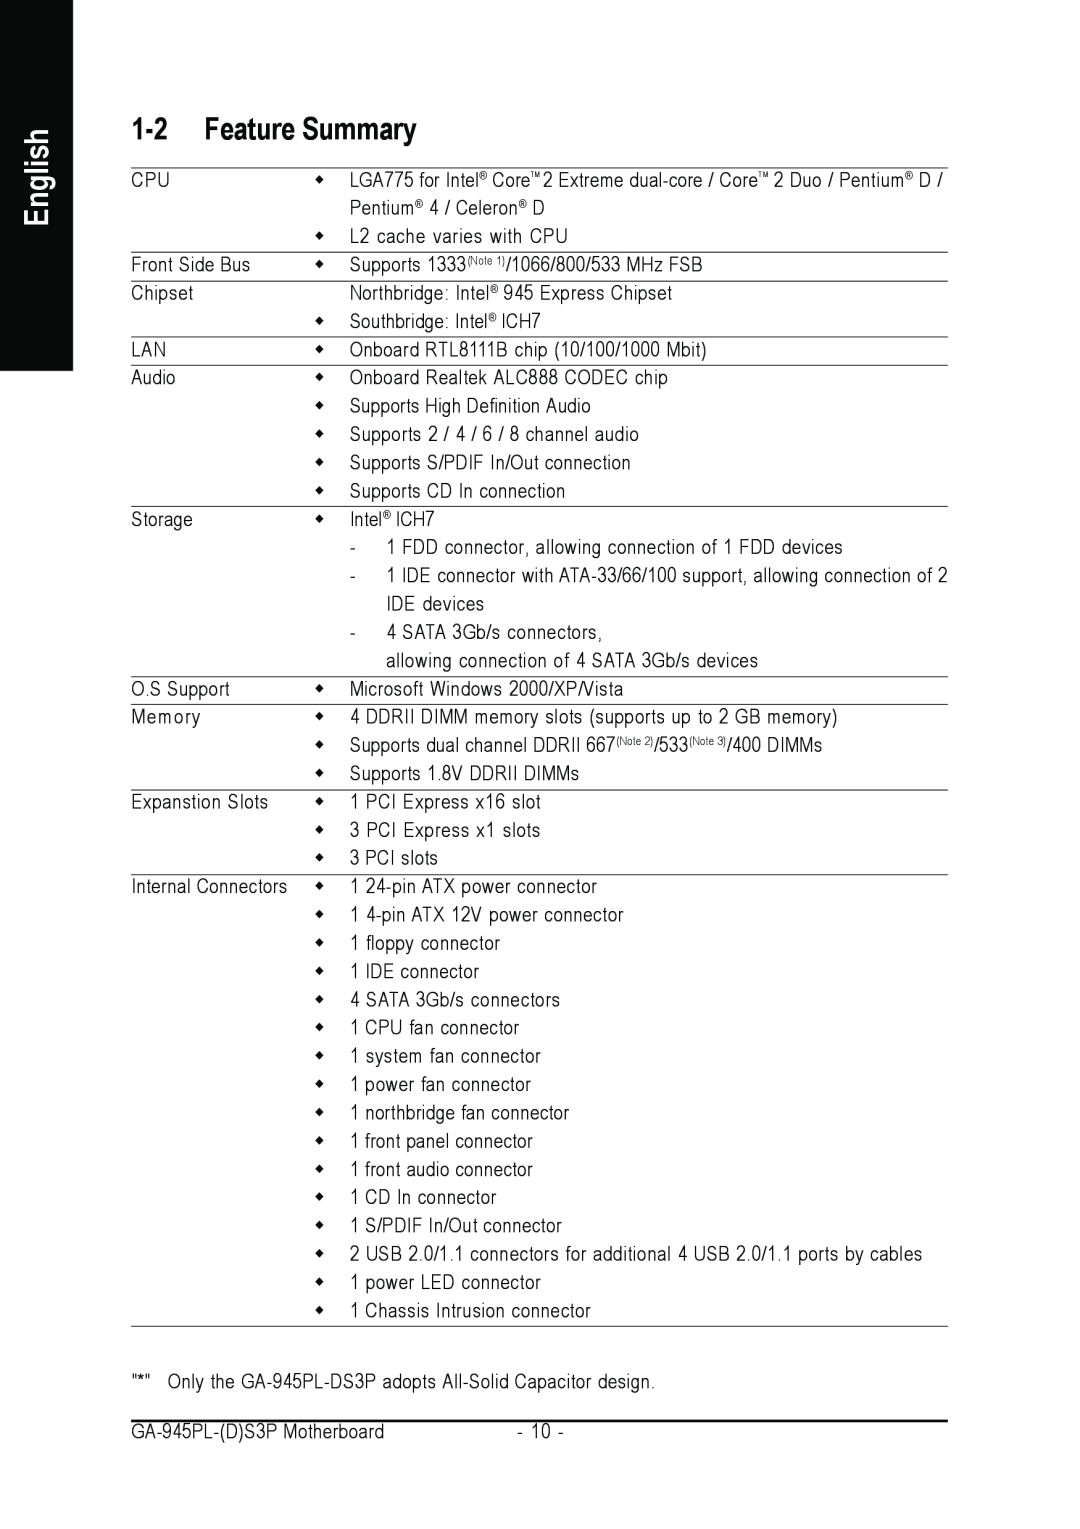 Intel GA-945PL-S3P user manual Feature Summary, English, IDE connector with ATA-33/66/100 support, allowing connection of 